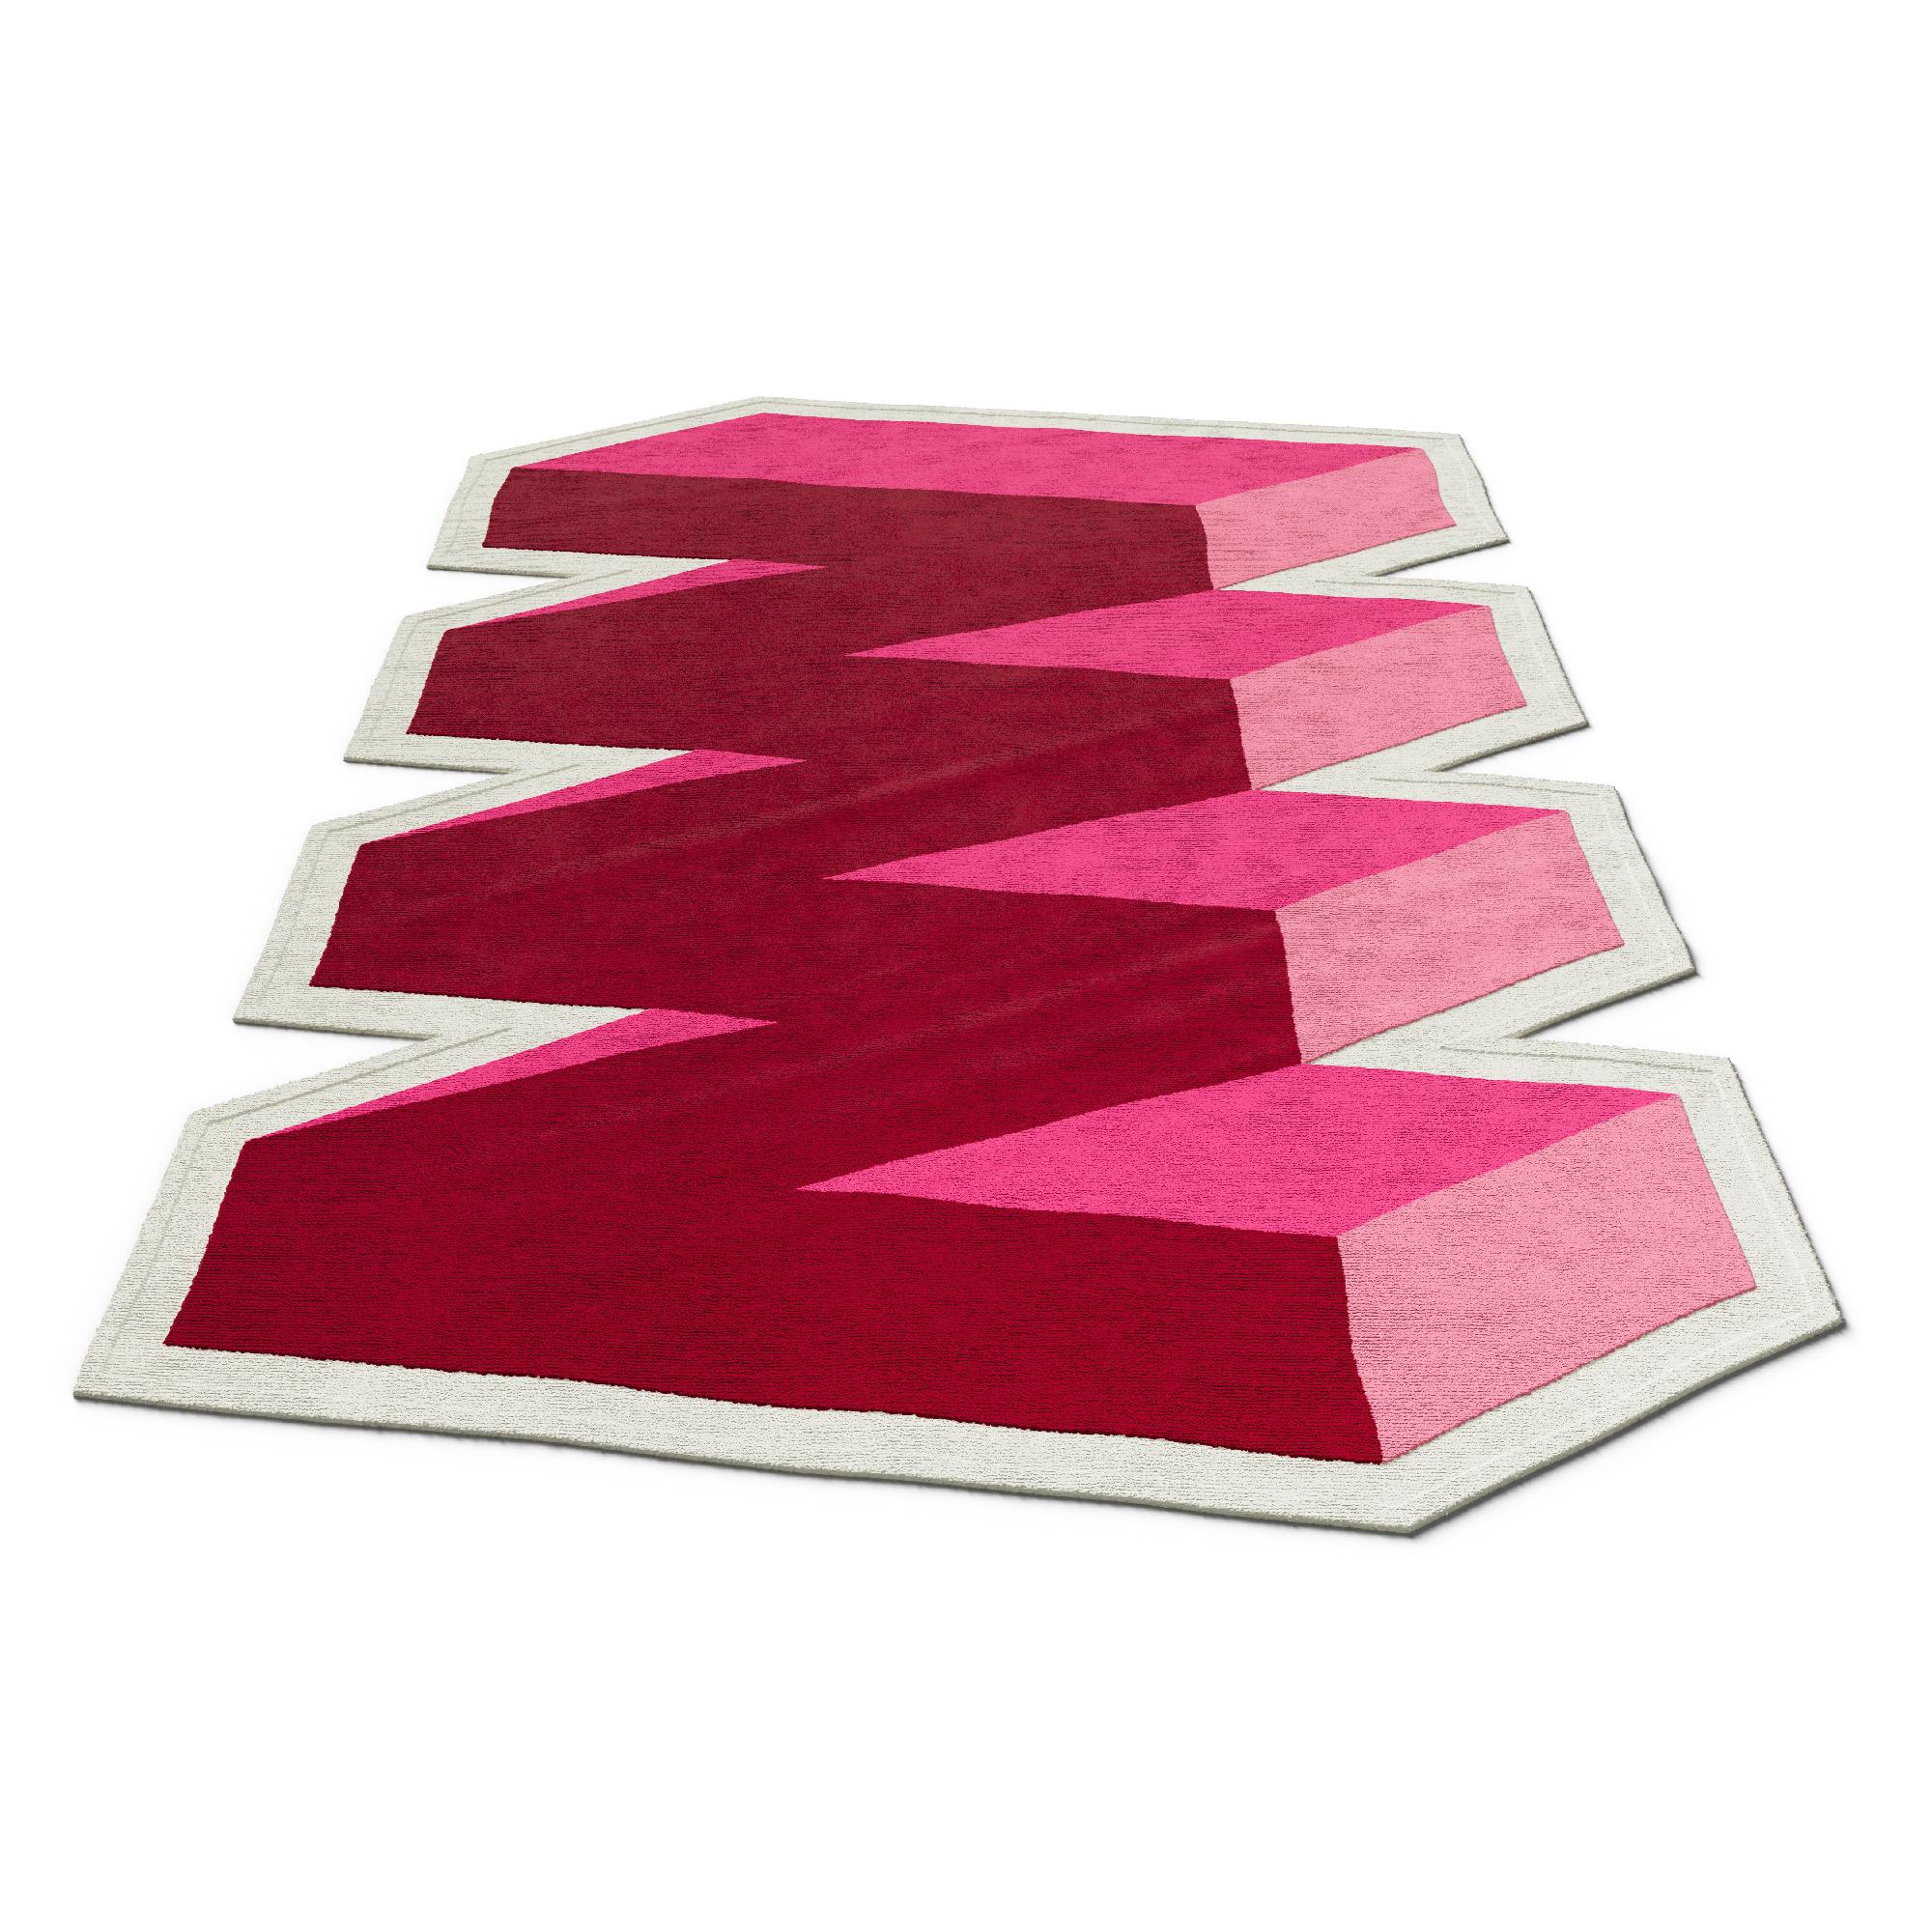 Down The Line Rug by Matthew Knight
Step into the vibrant world of abstract art with the Down The Line Rug, an exquisite piece from the Not Pop collection, designed by renowned Belfast artist, Matthew Knight. This rug, featuring a bold zigzag